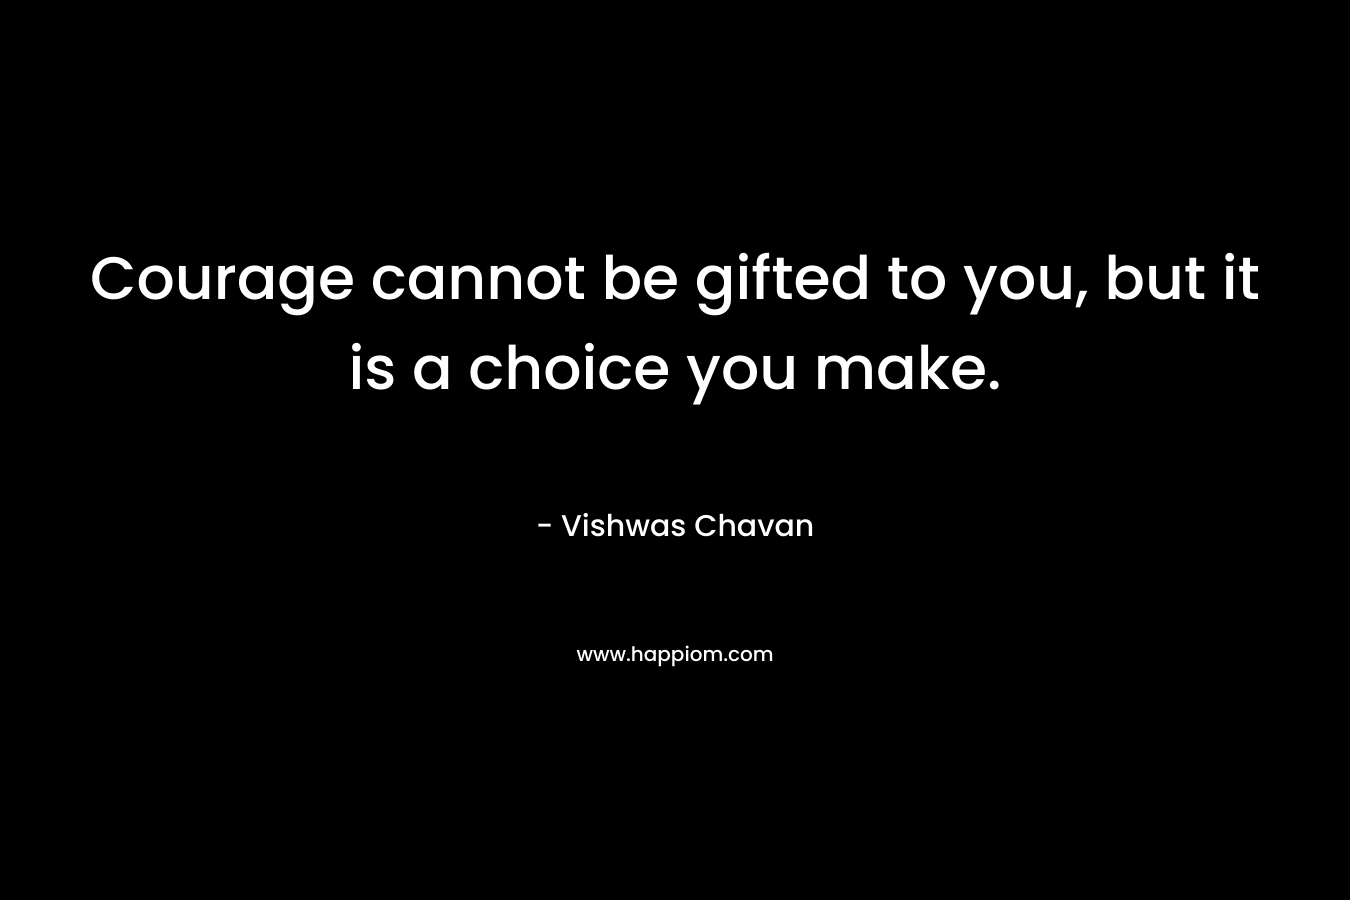 Courage cannot be gifted to you, but it is a choice you make.